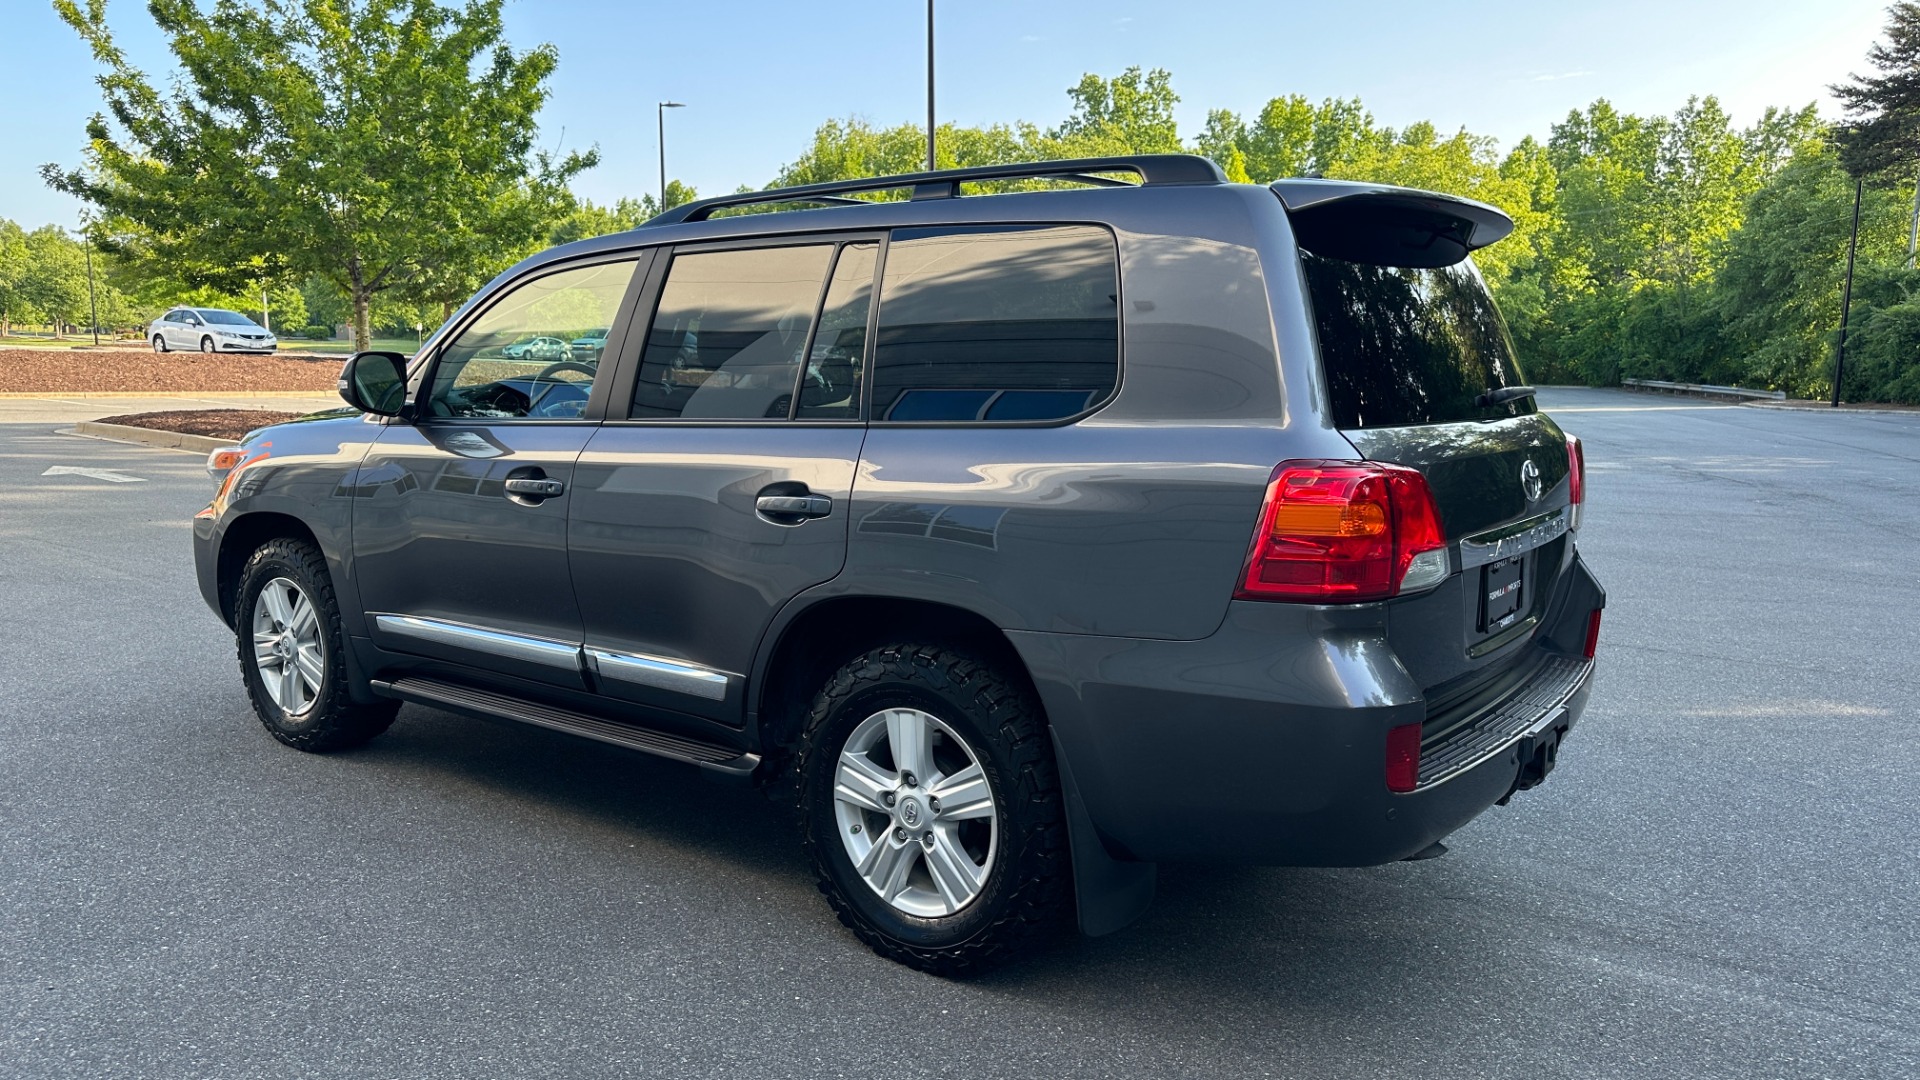 Used 2015 Toyota Land Cruiser 3RD ROW / LEATHER / HEATED SEATS / NAV / DVD / LOADED for sale Sold at Formula Imports in Charlotte NC 28227 4